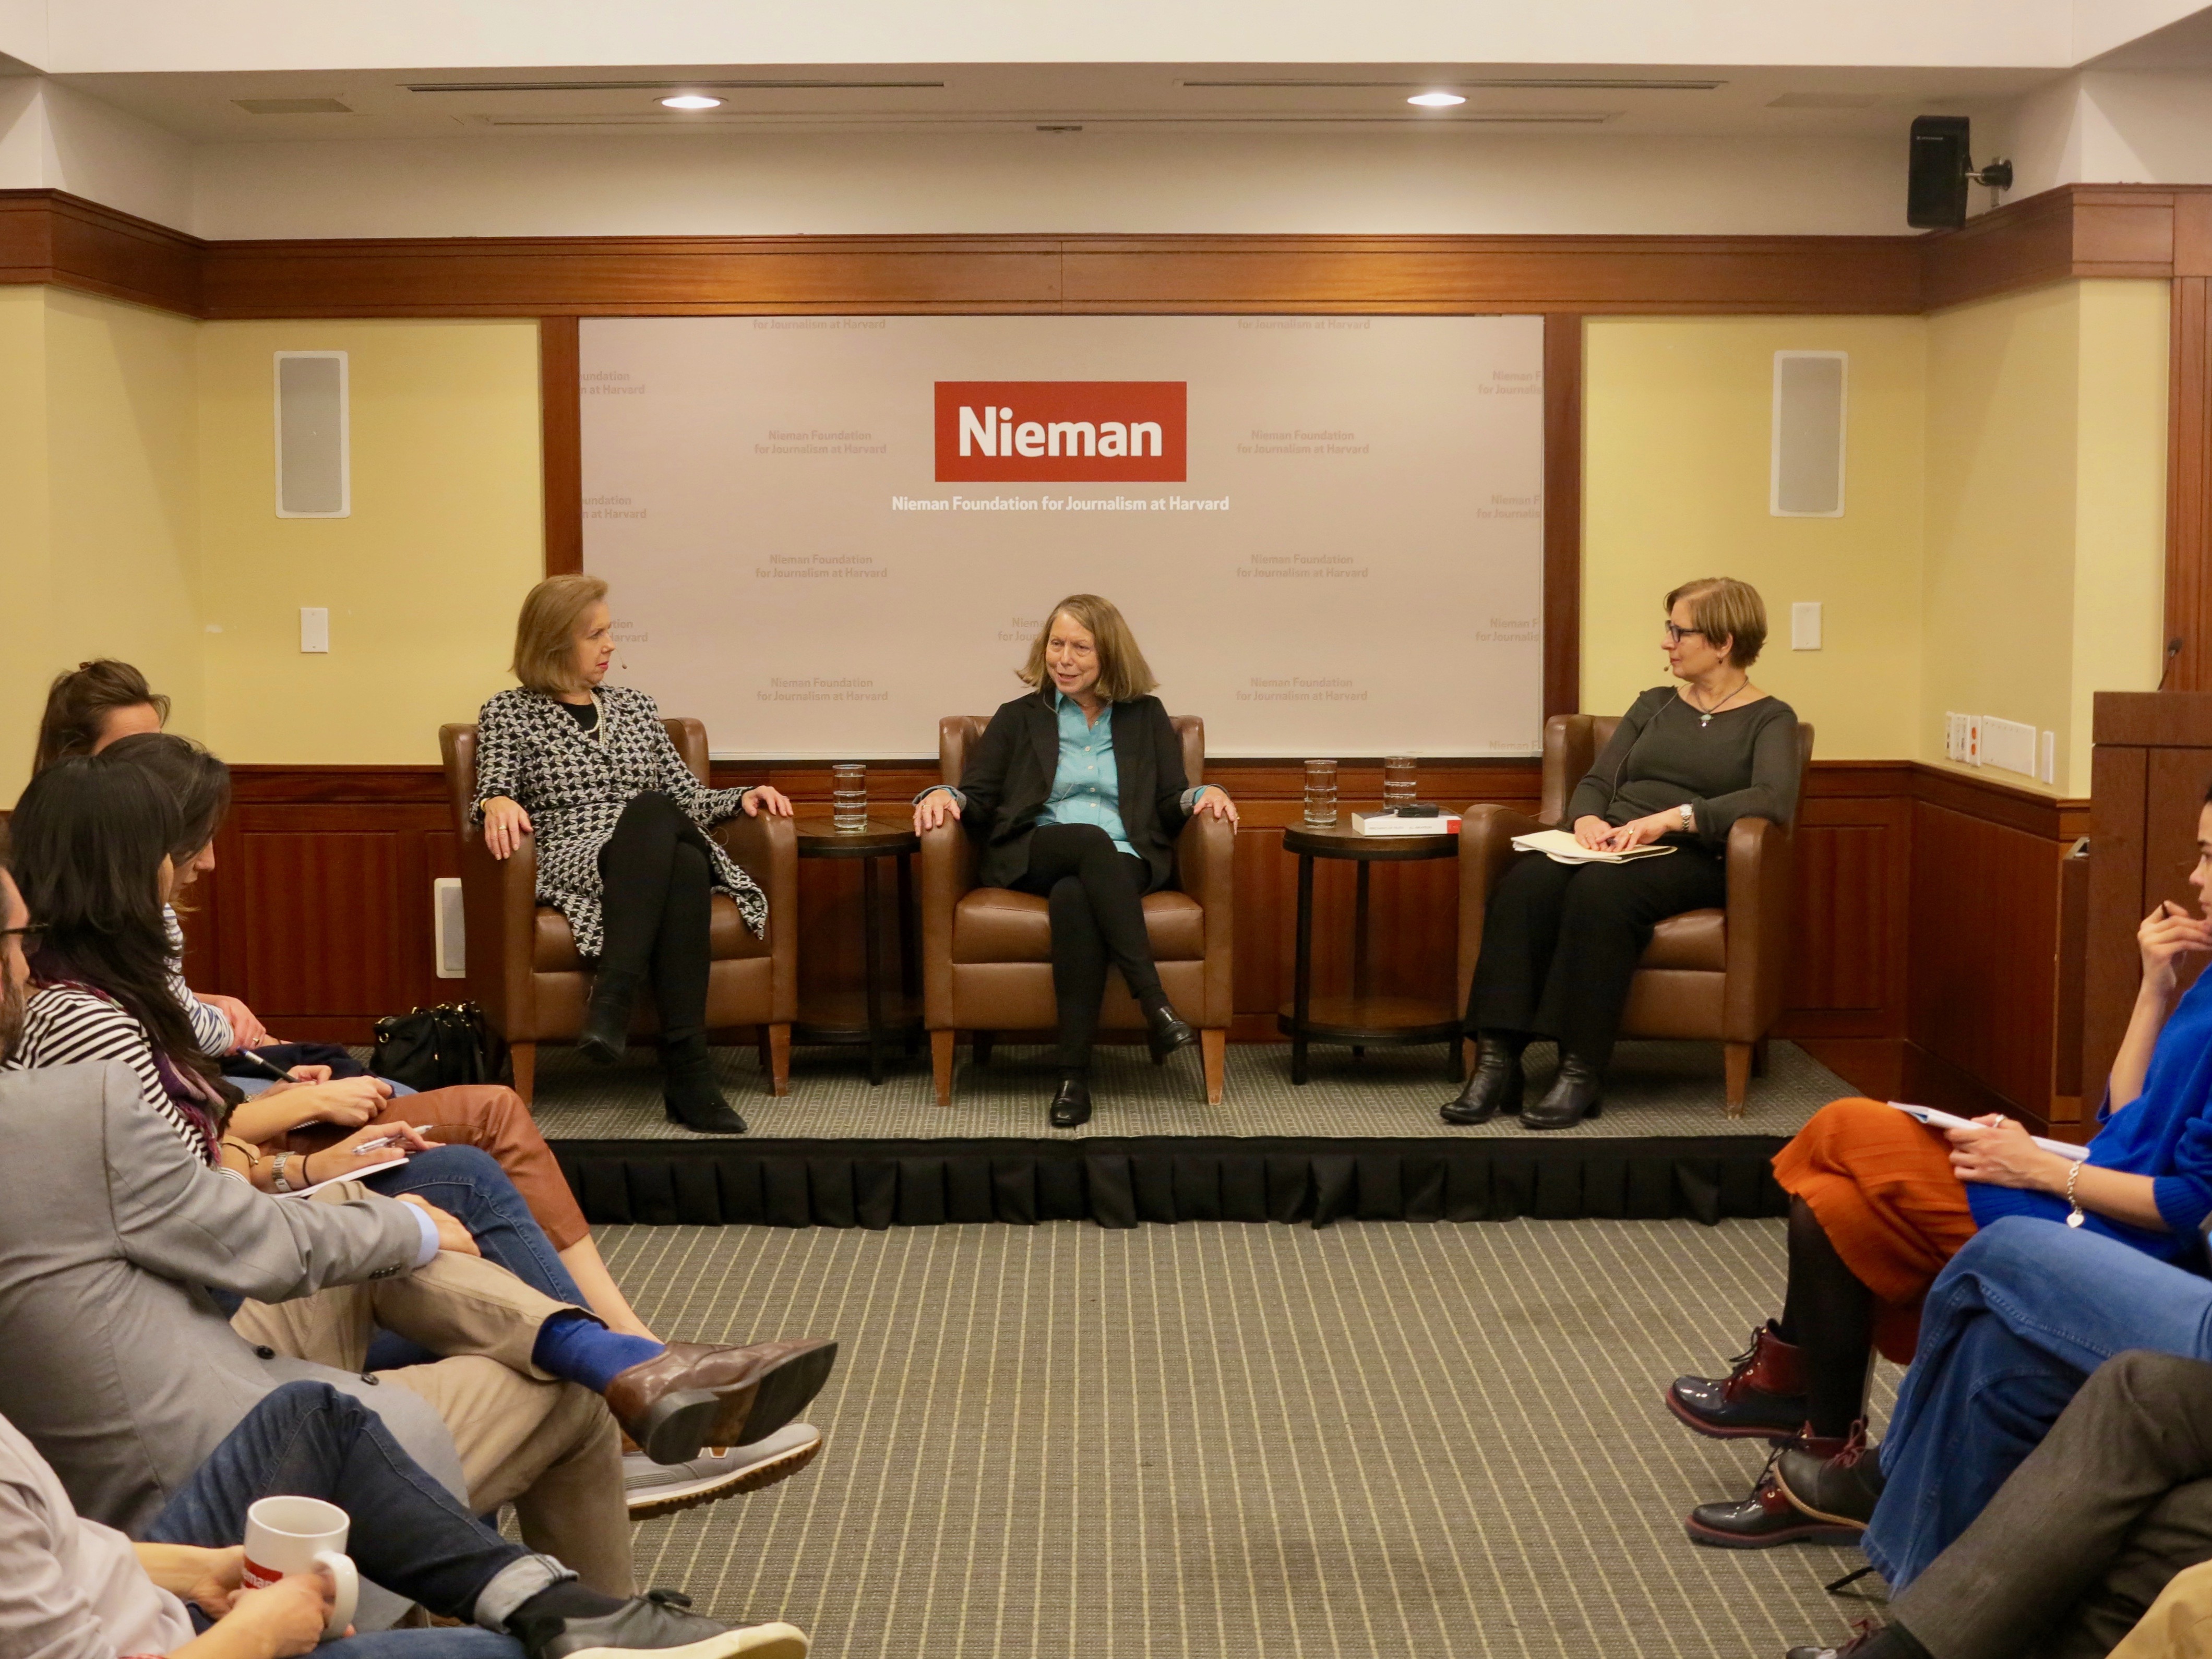 Nancy Gibbs (left) and Jill Abramson (center), former editors at Time magazine and The New York Times, respectively, speak with Nieman curator Ann Marie Lipinski during a visit to the Nieman Foundation